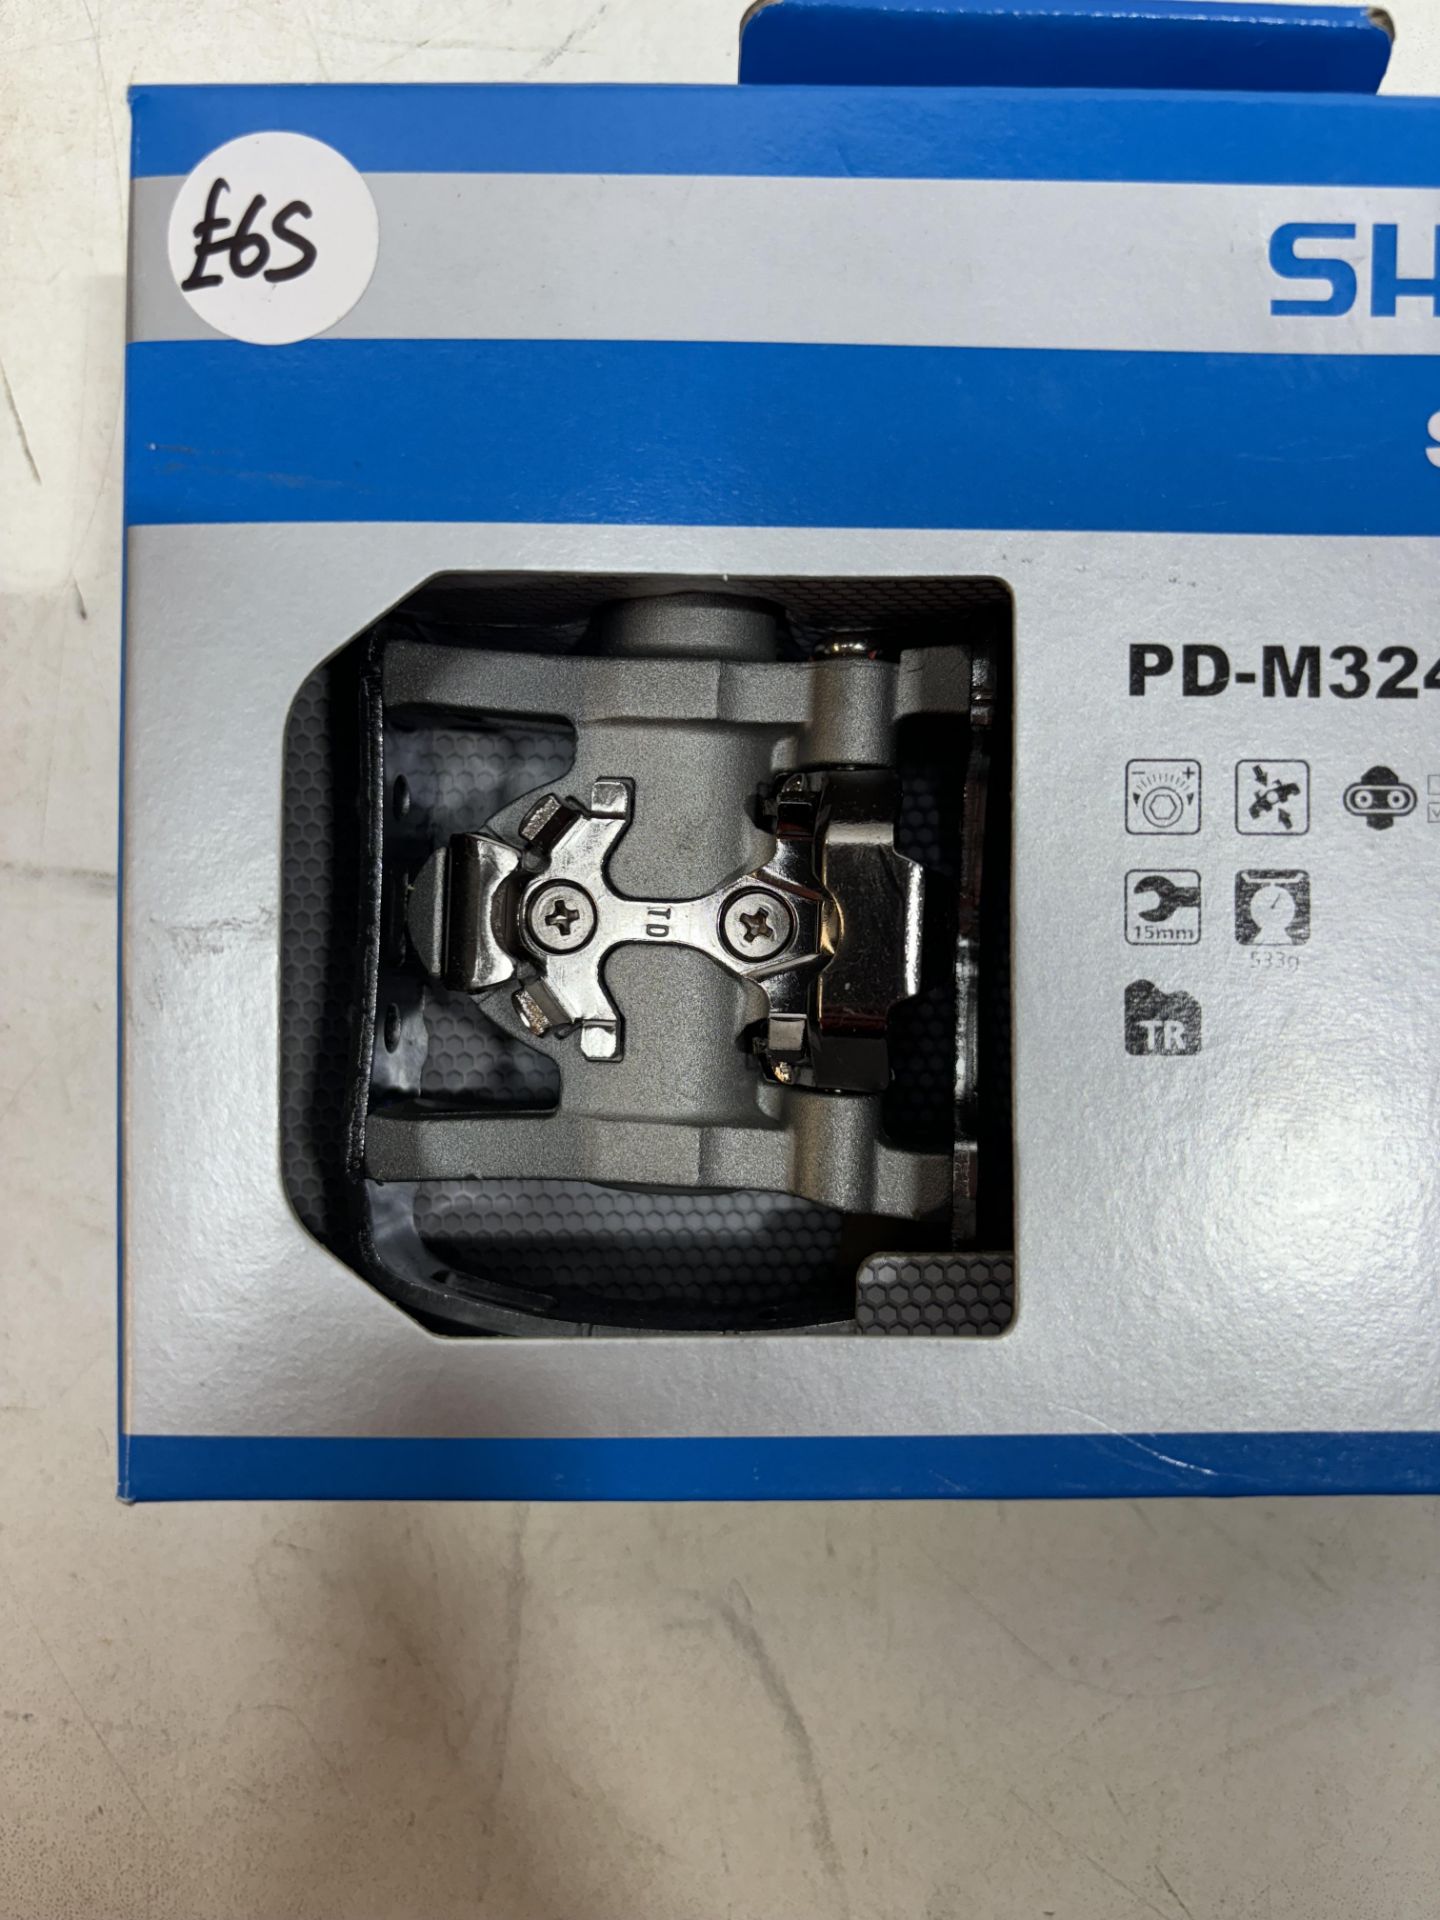 Shimano PD-M324 SPD Pedals, silver - Image 5 of 6